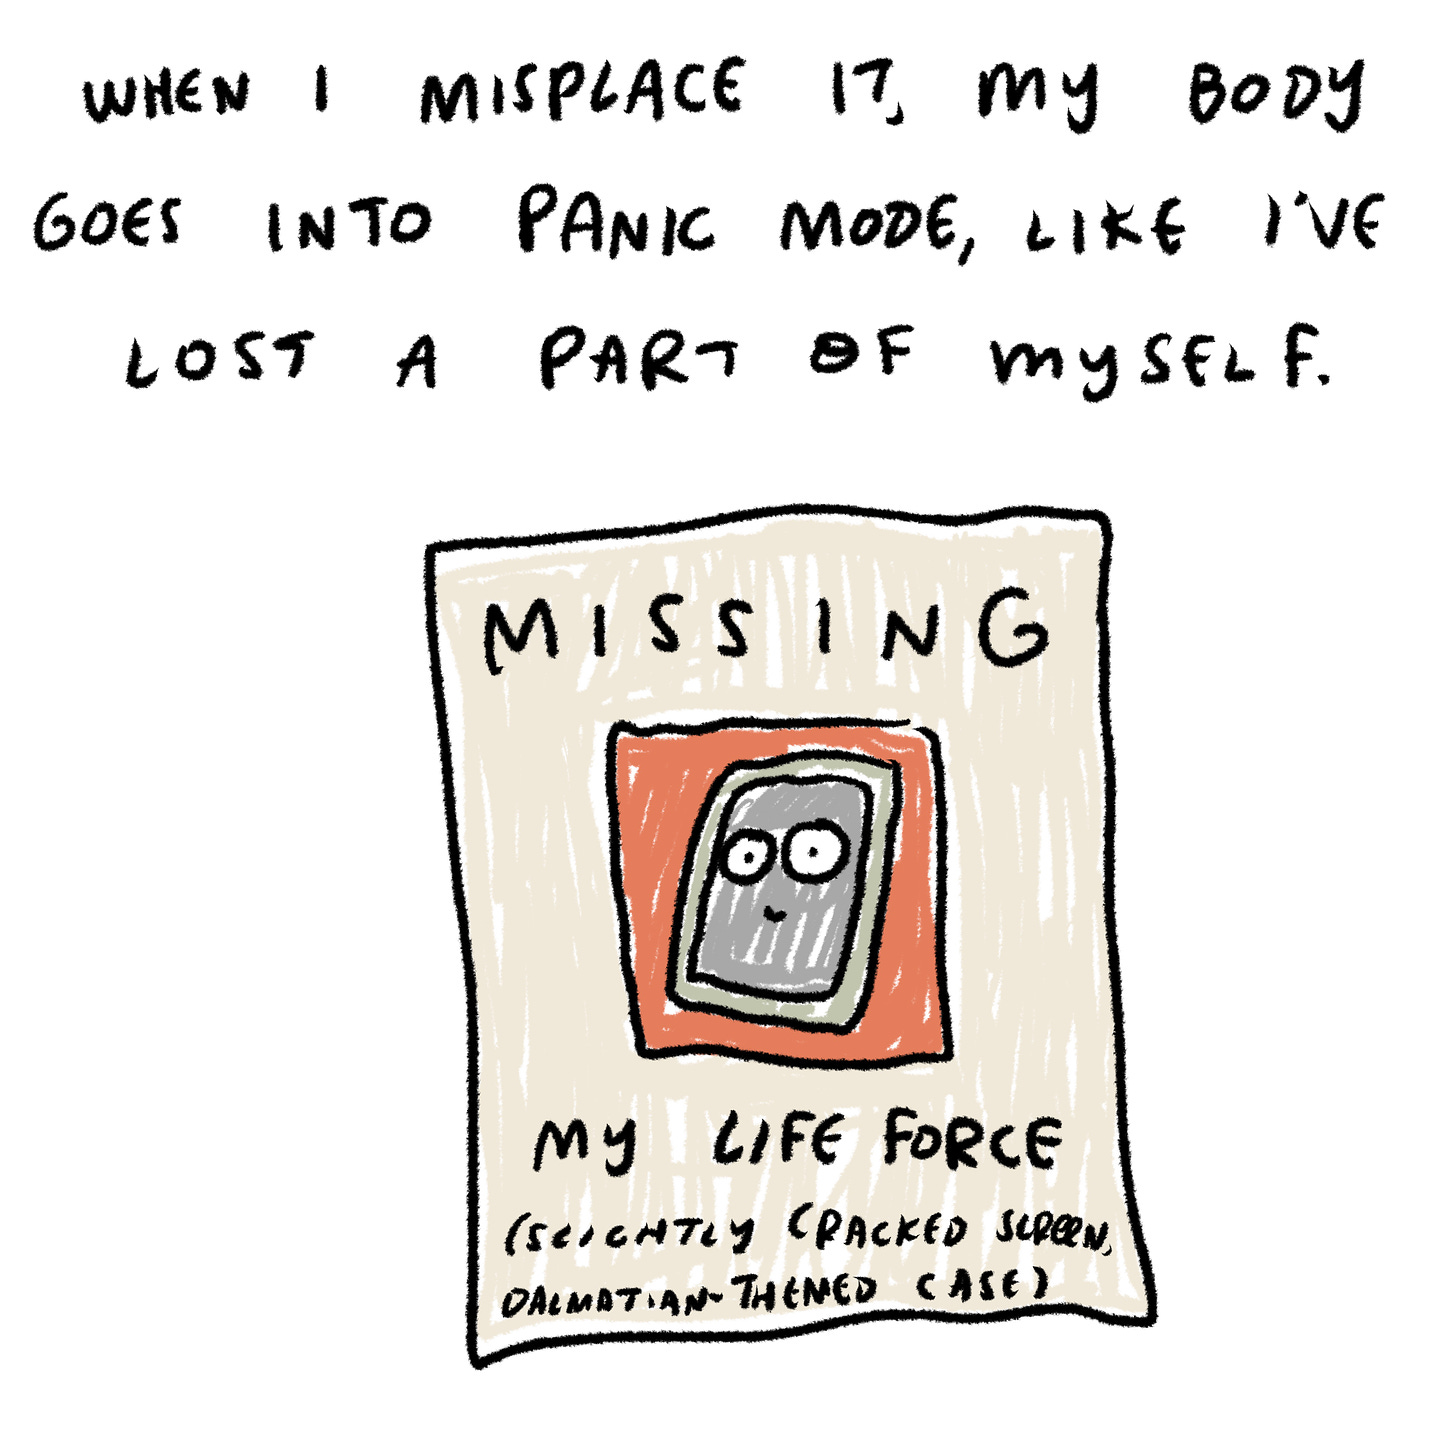 When I misplace it, my body goes into panic mode, like I’ve lost a part of myself. 